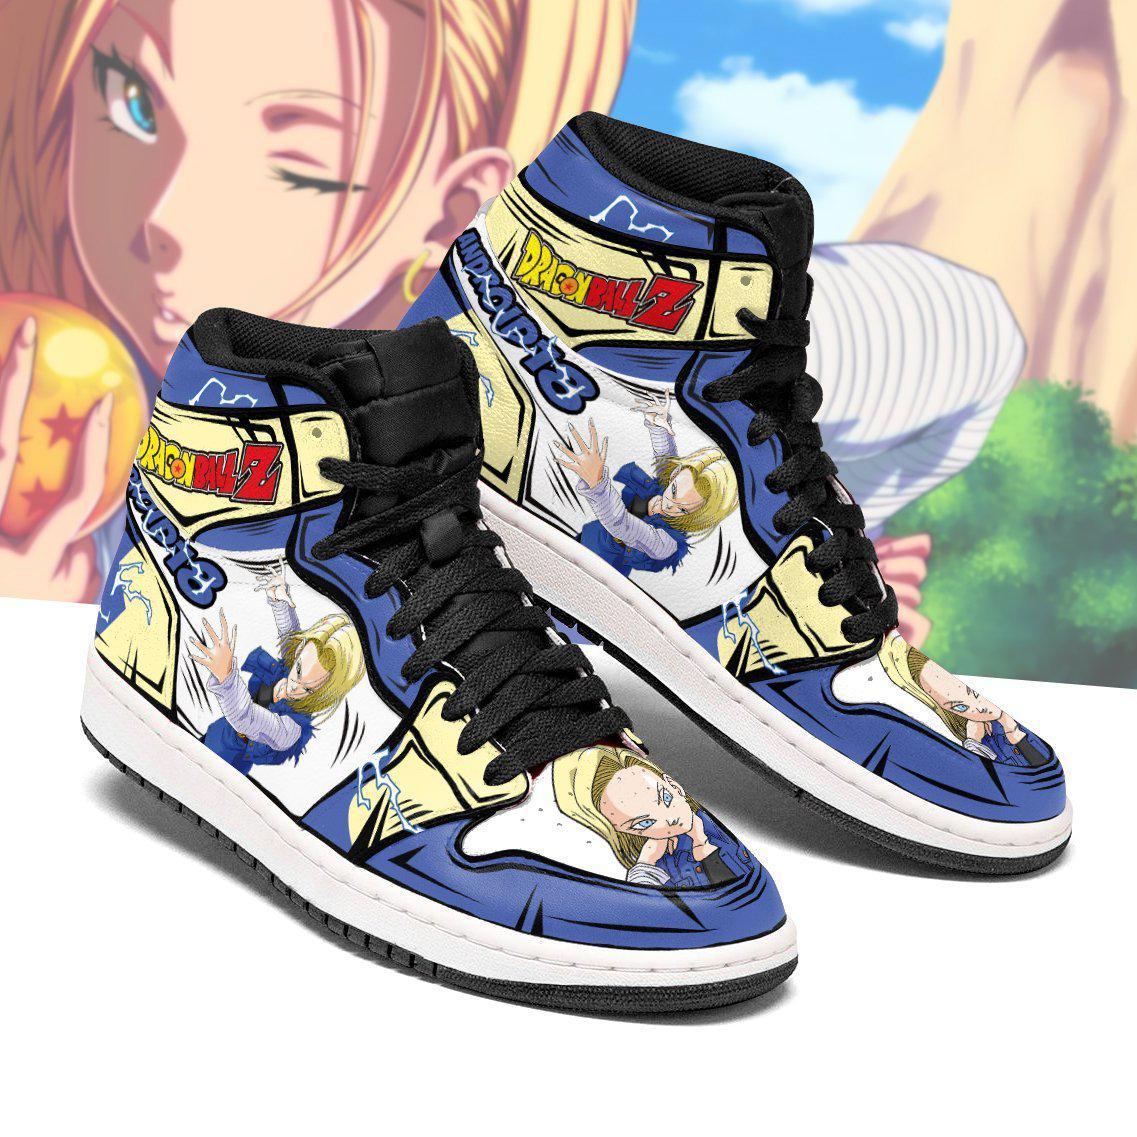 Android 18 Sneakers Dragon Ball Z Anime Shoes Fan Gift MN04 ...